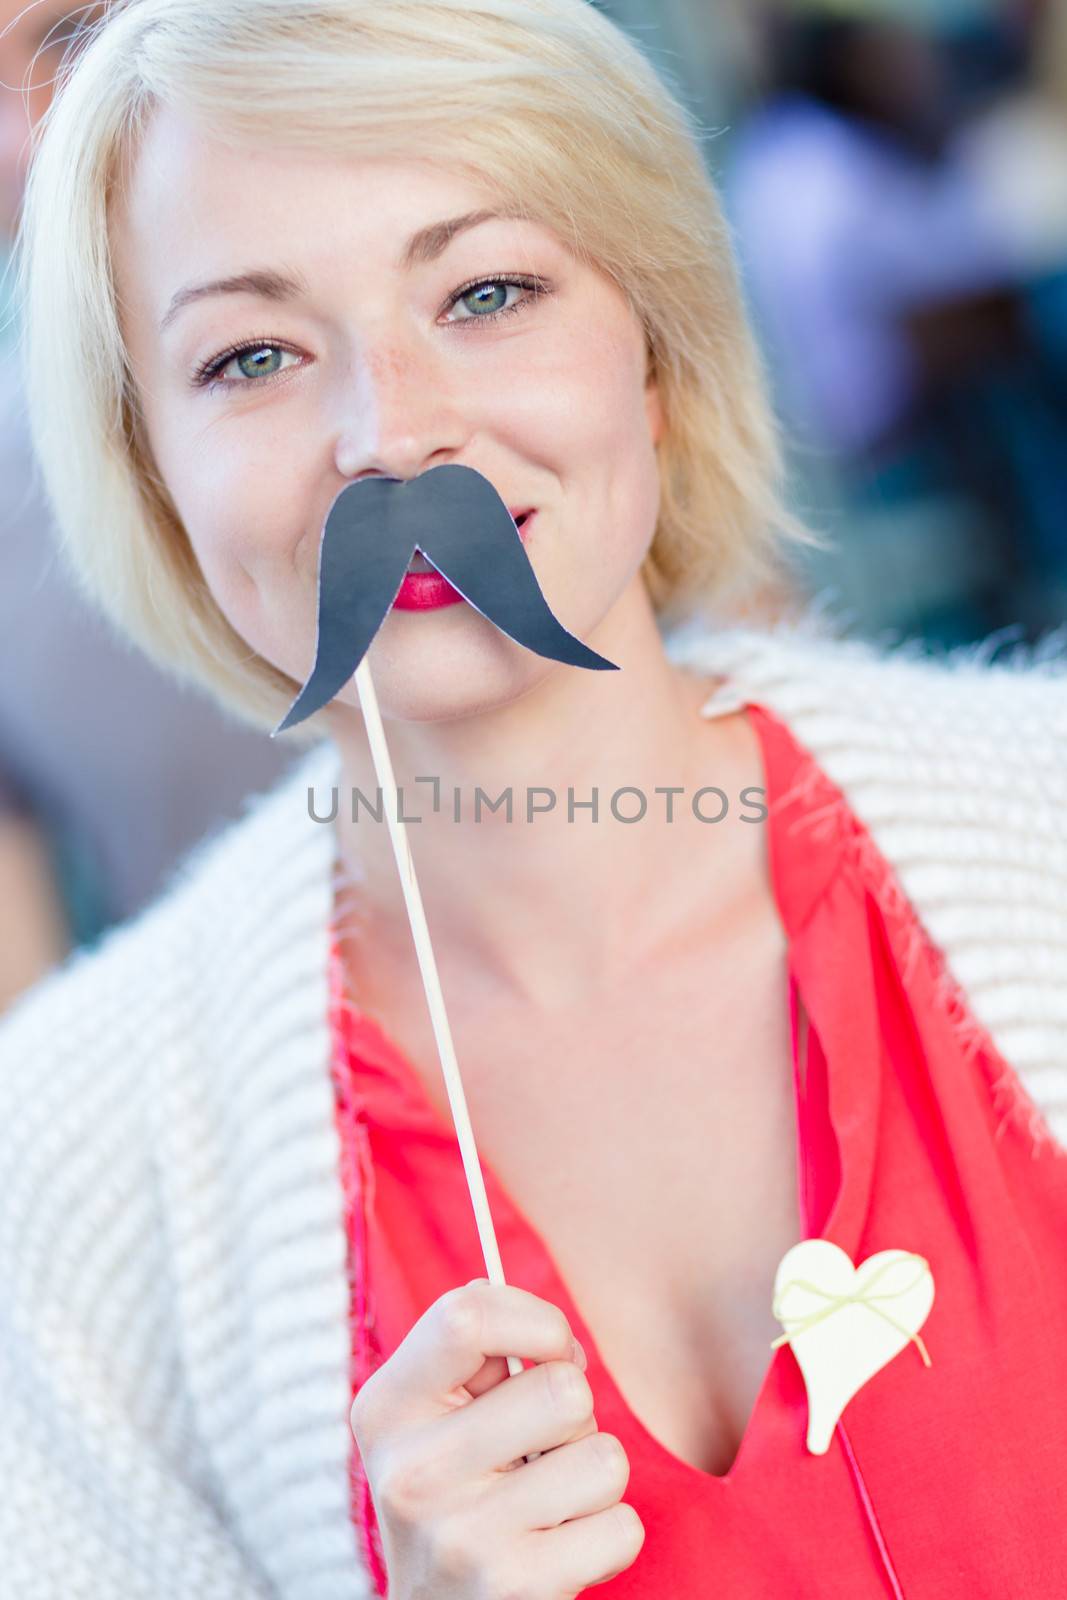 Woman with fake mustache. by kasto